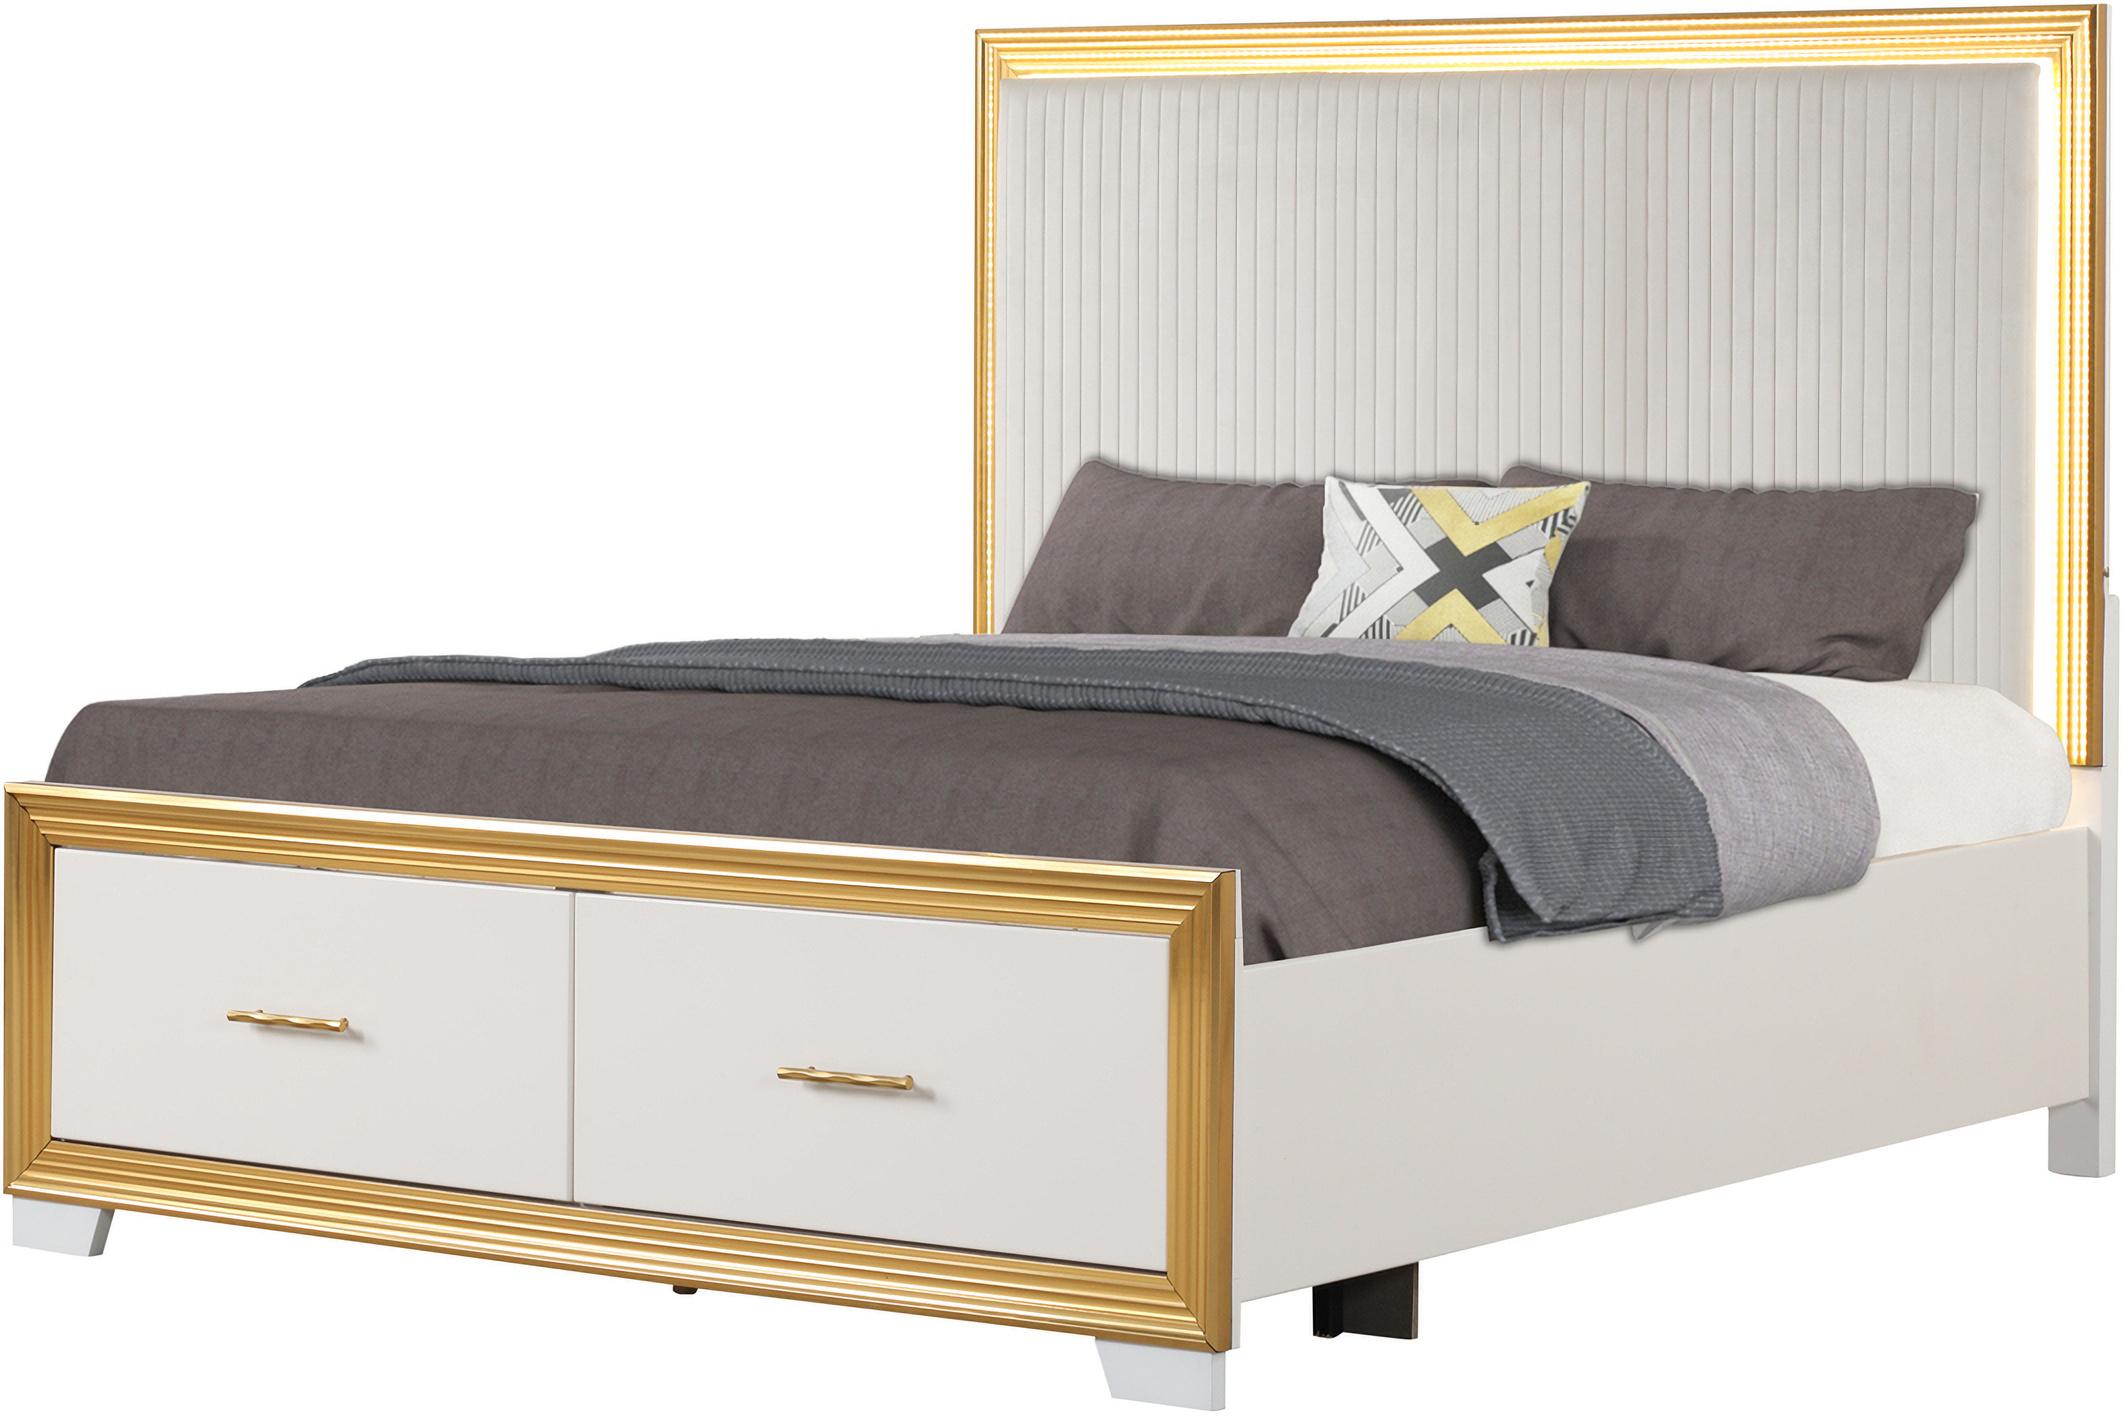 Contemporary, Modern Storage Bed Obsession Obsession-Q in White Fabric